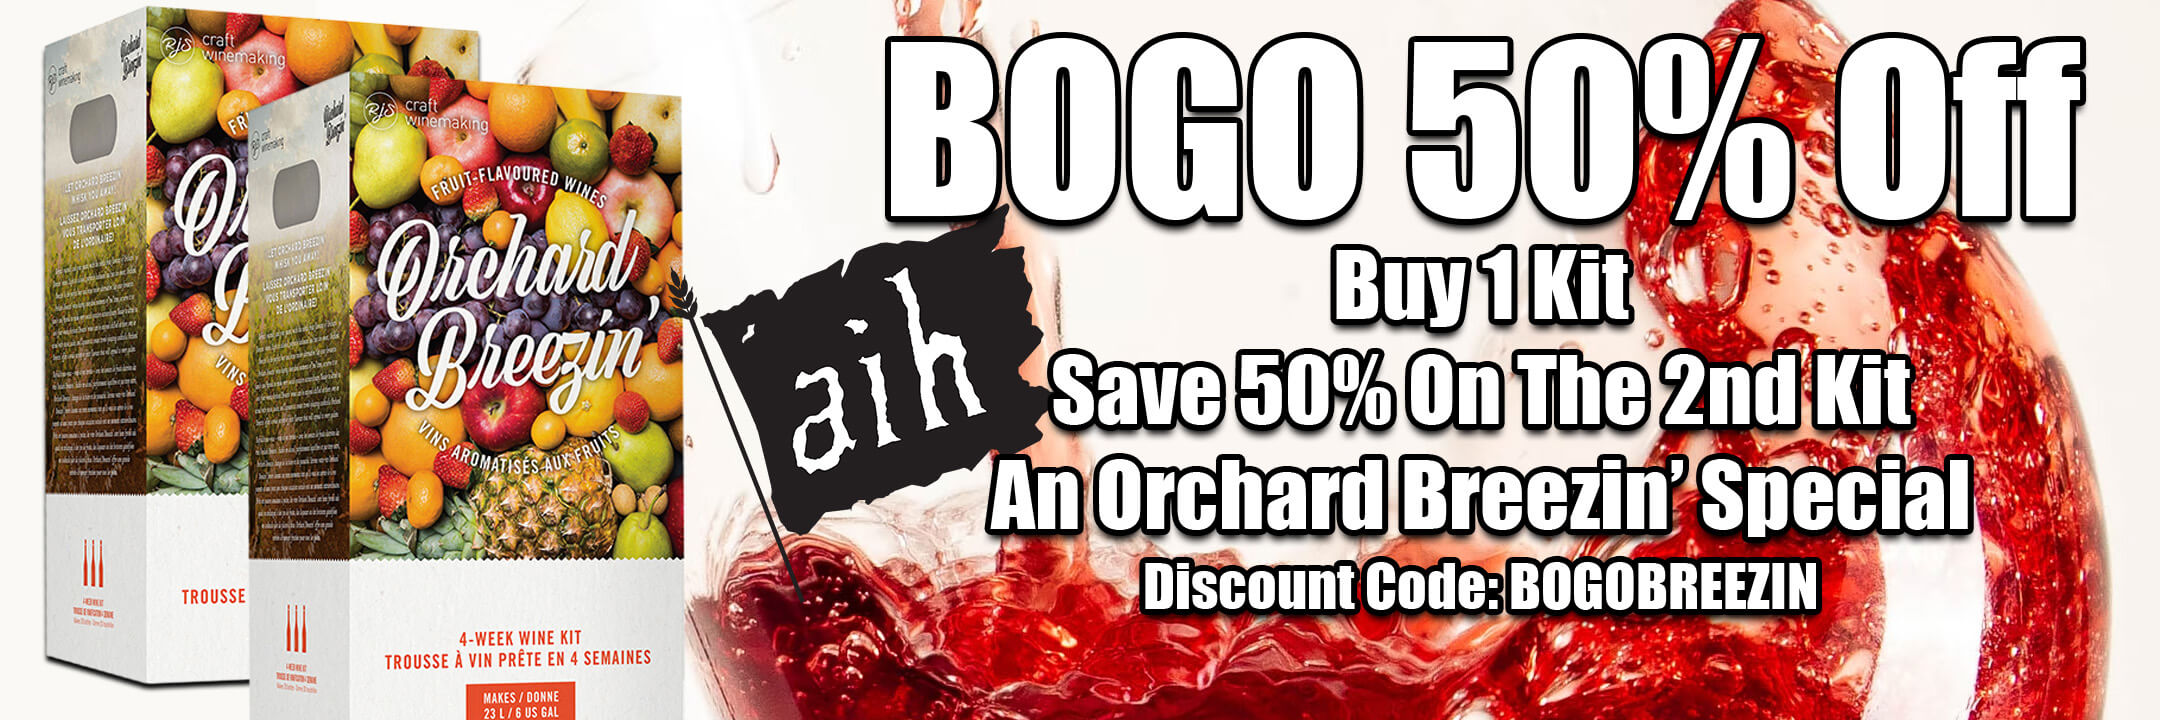 BOGO 50% Off: Buy 1 Kit, Save 50% on The 2nd Kit. An Orchard Breezin' Special